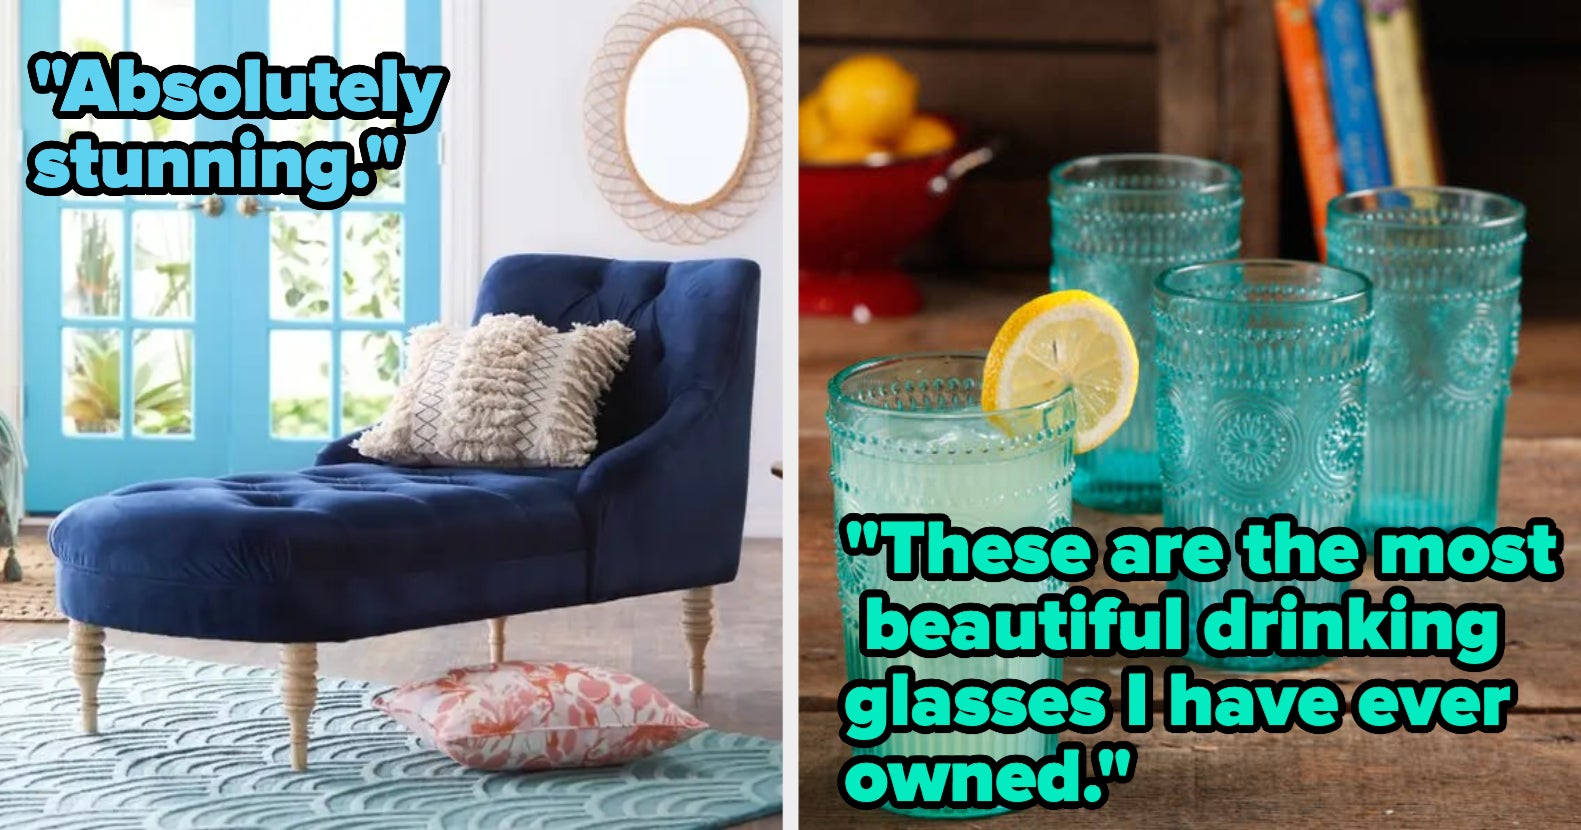 31 Things From Walmart So Gorgeous You'll Probably Want To Add Them To Your  Closet Immediately